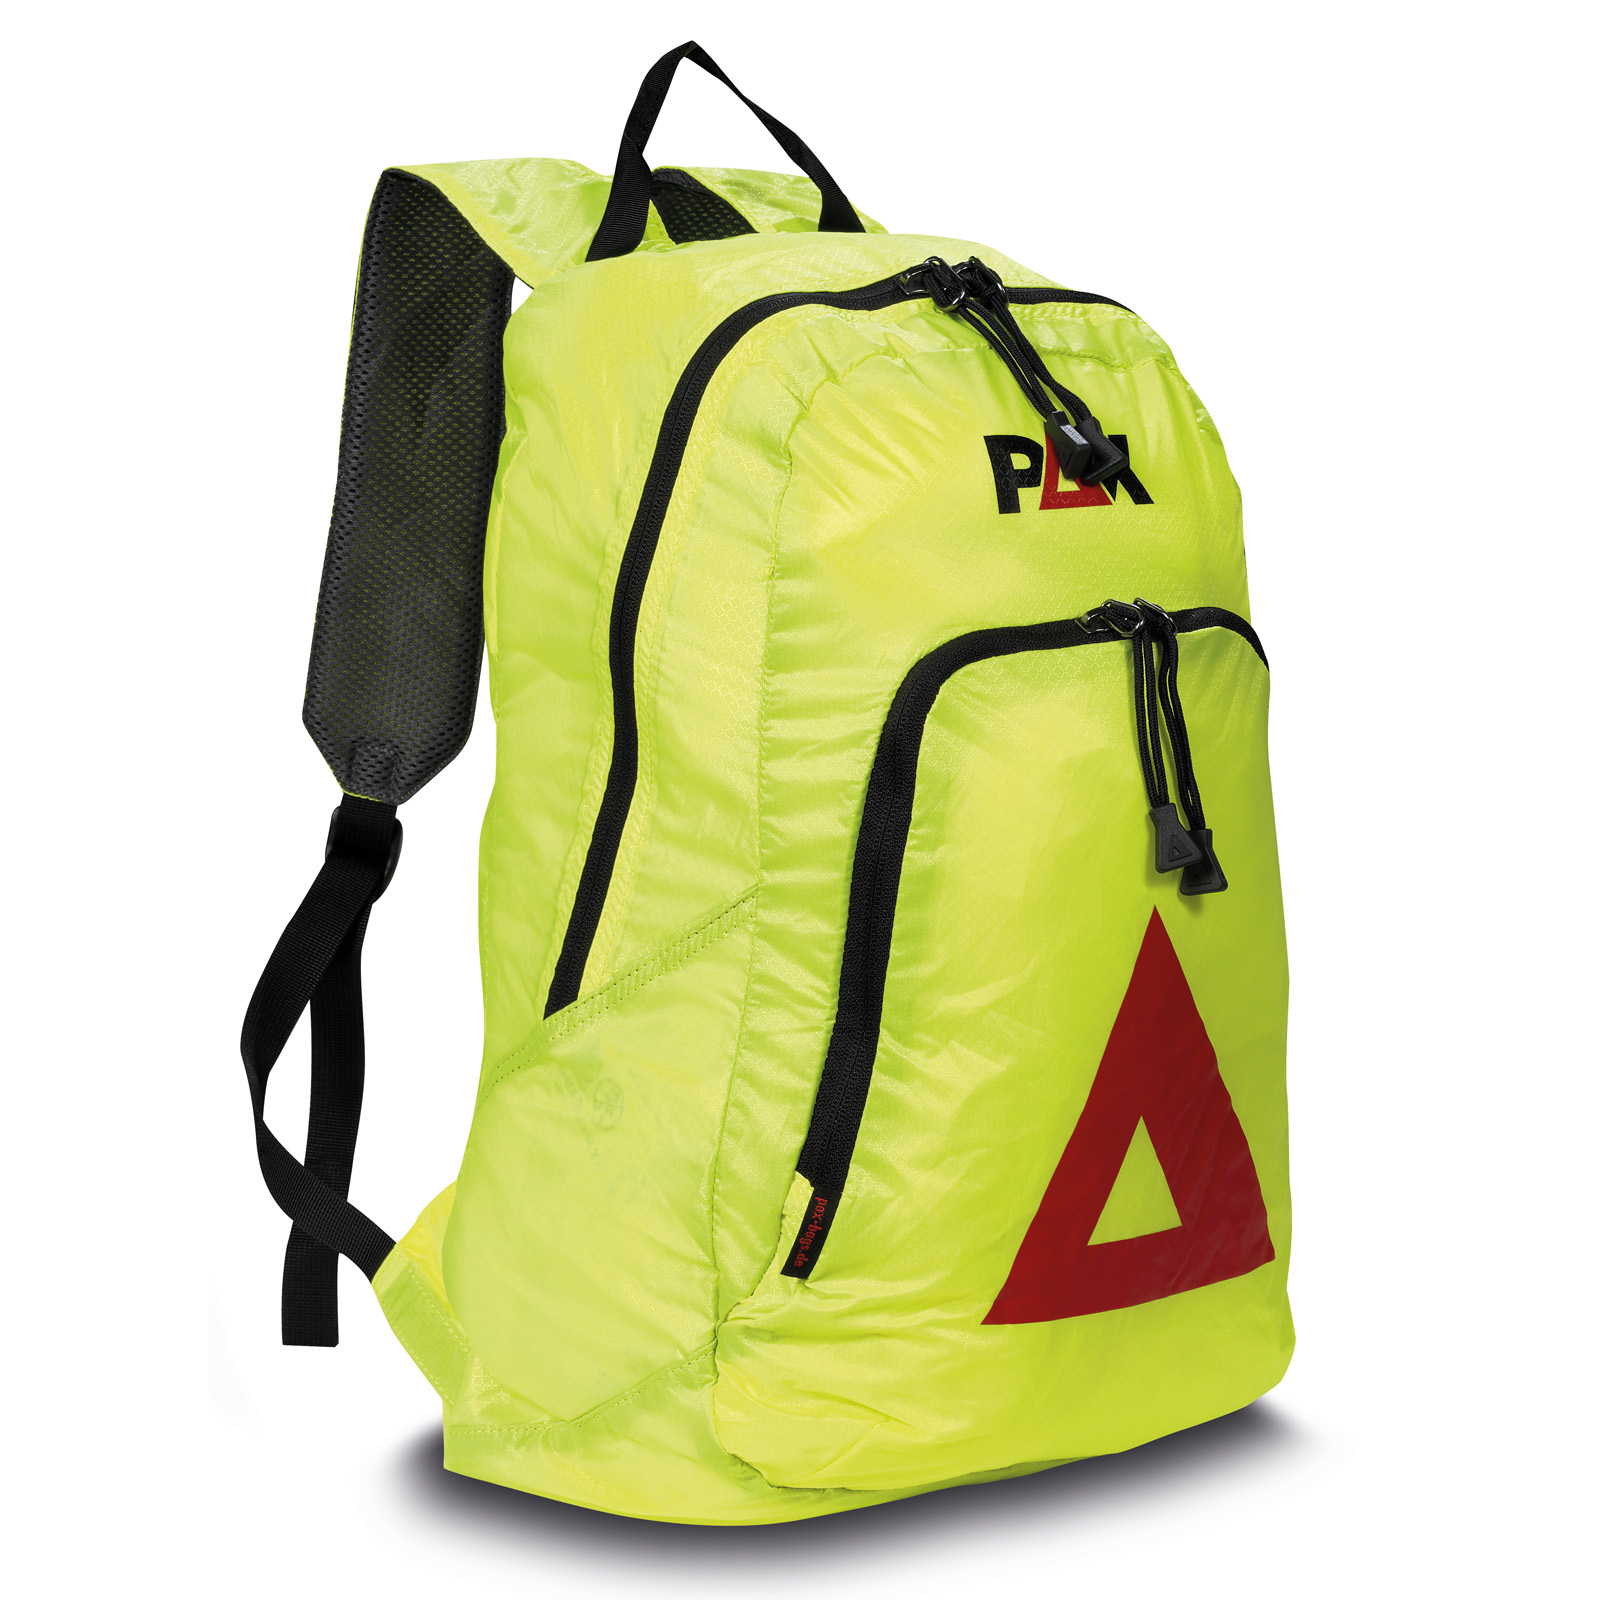 exPAXable Rucksack, PAX-Light in tagesleuchtgelb